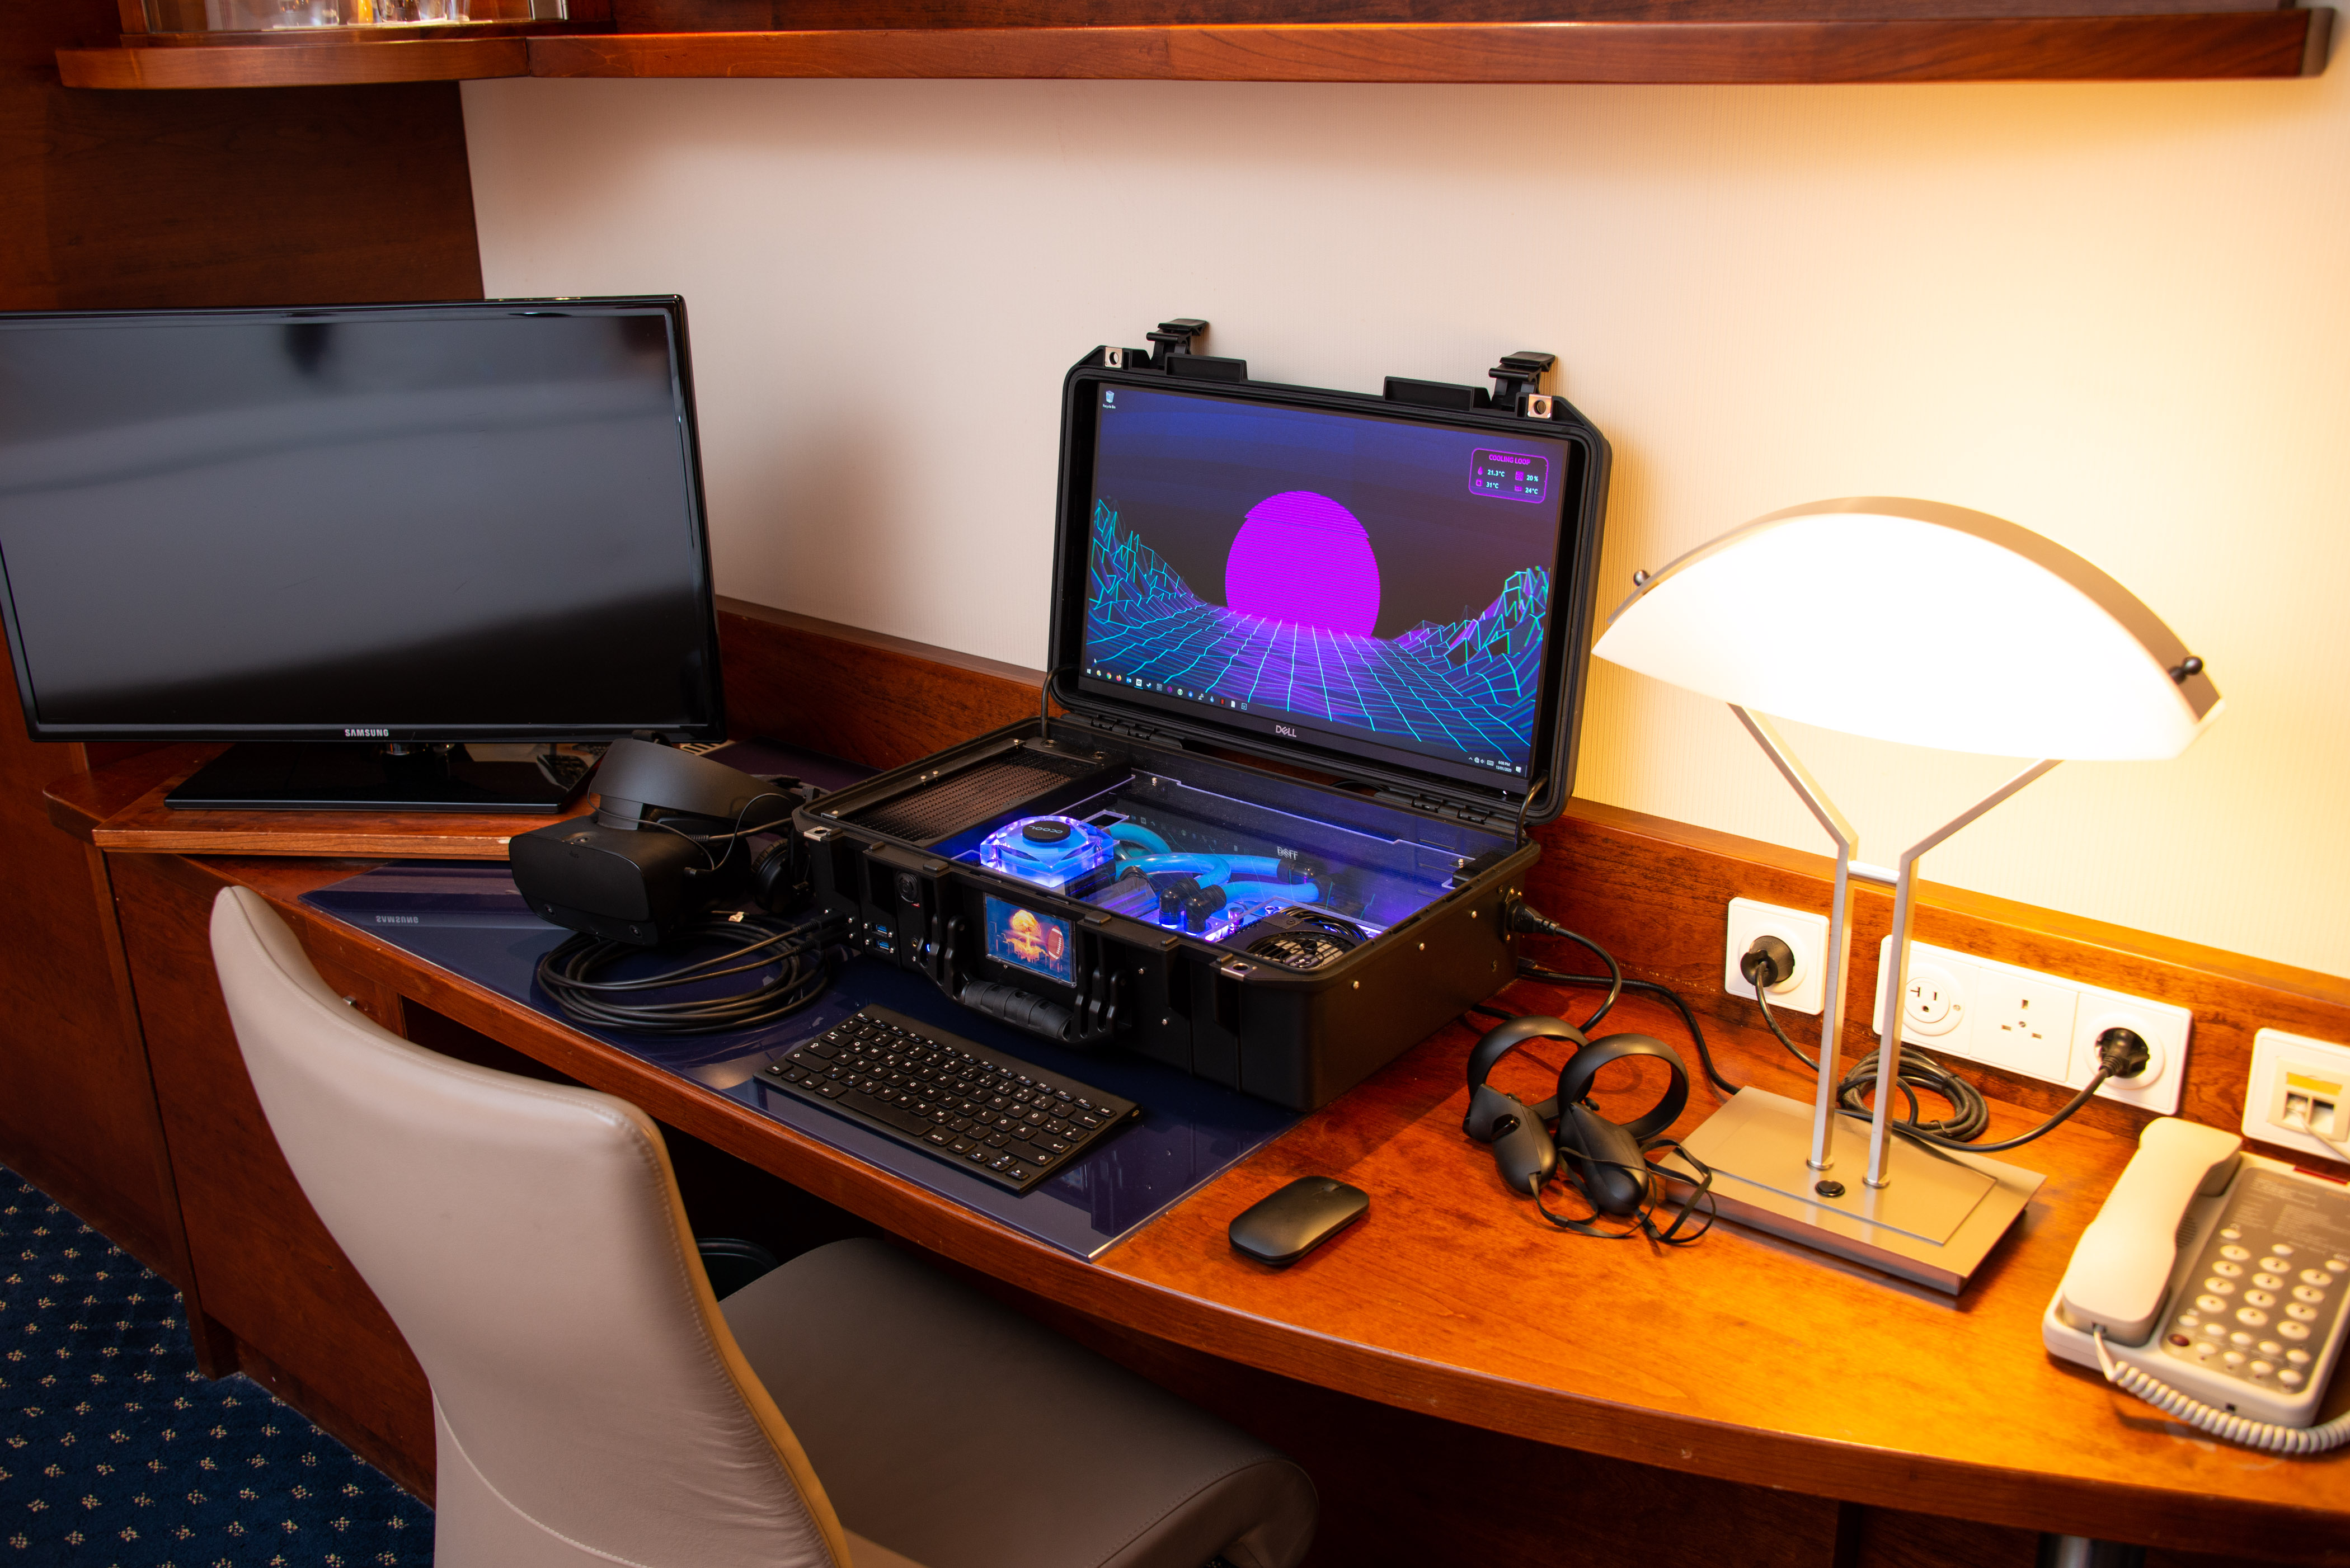 Briefcase Turned Into Liquid Cooled Gaming Pc With Built In 23